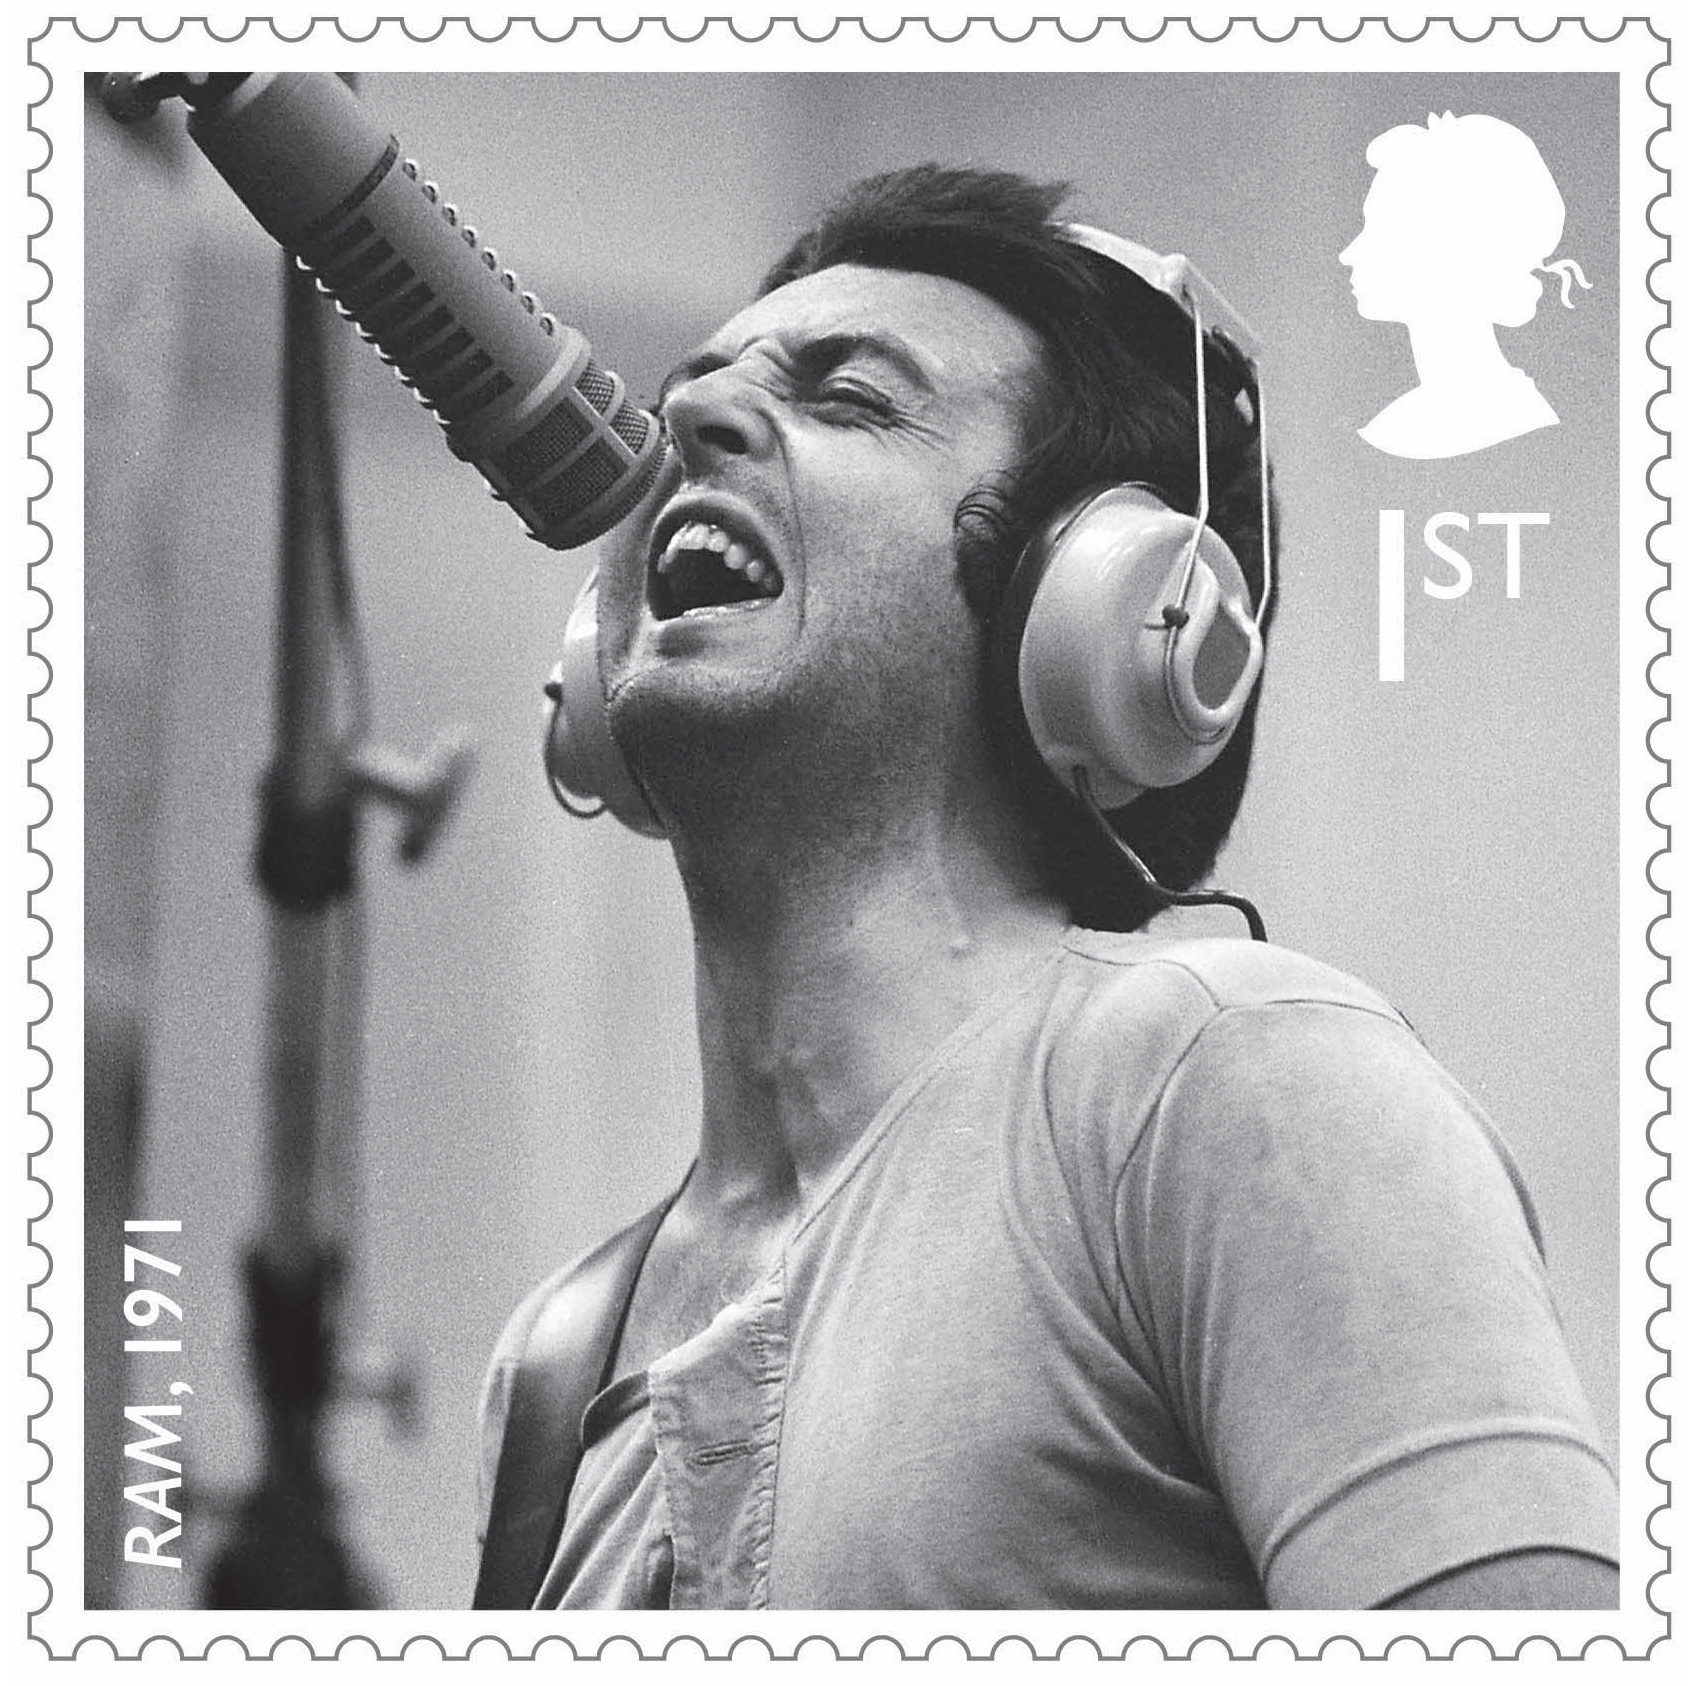 A still of a Royal Mail stamp created in honor of Sir Paul McCartney shows him in the studio working on the "Ram" album in 1971. Royal Mail/MPL Communications Ltd/Handout via REUTER